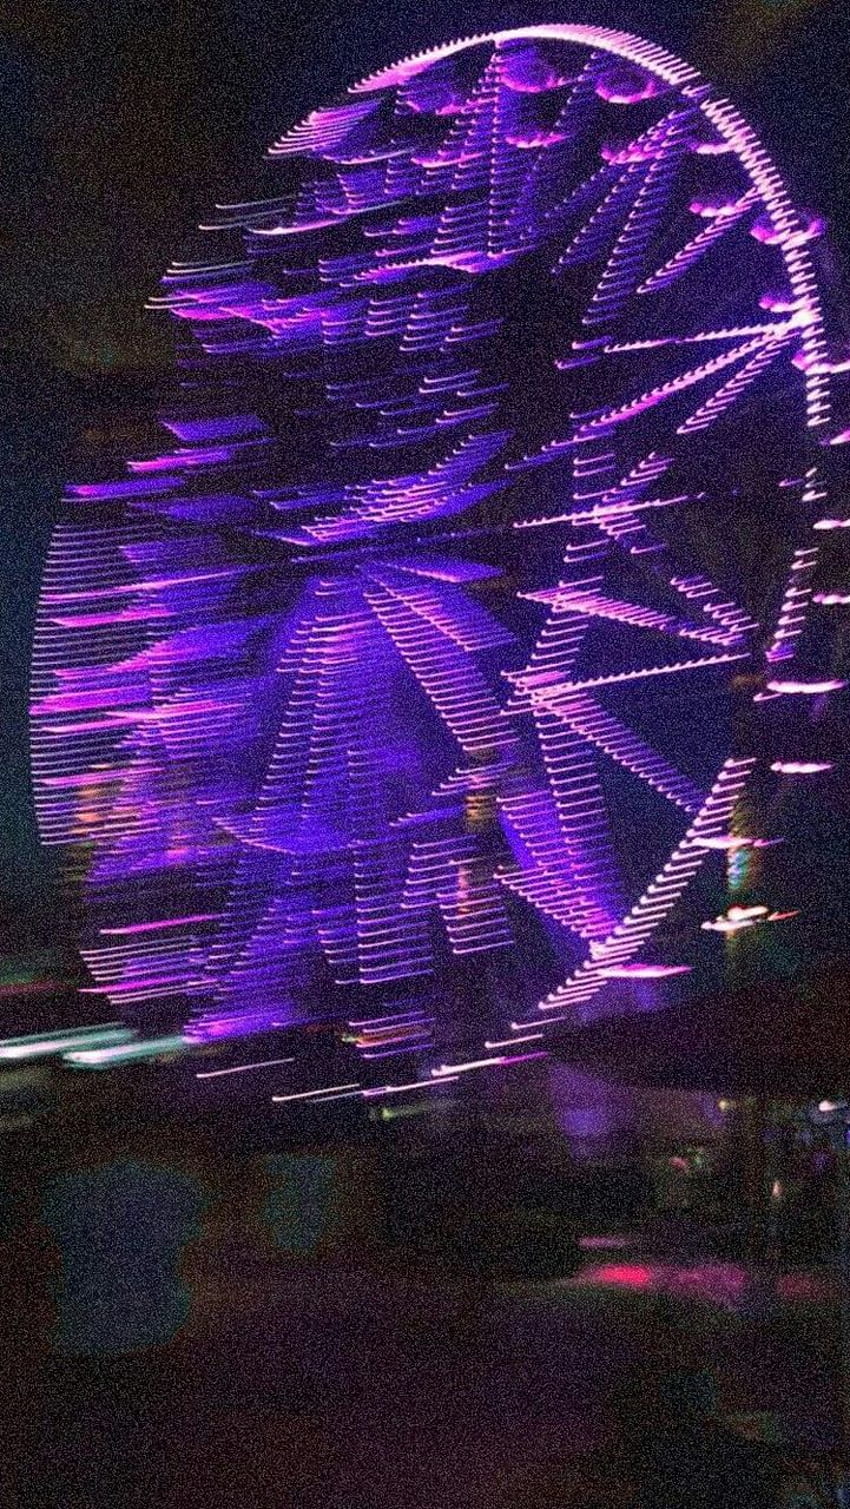 A ferris wheel at night with lights on it - Blurry